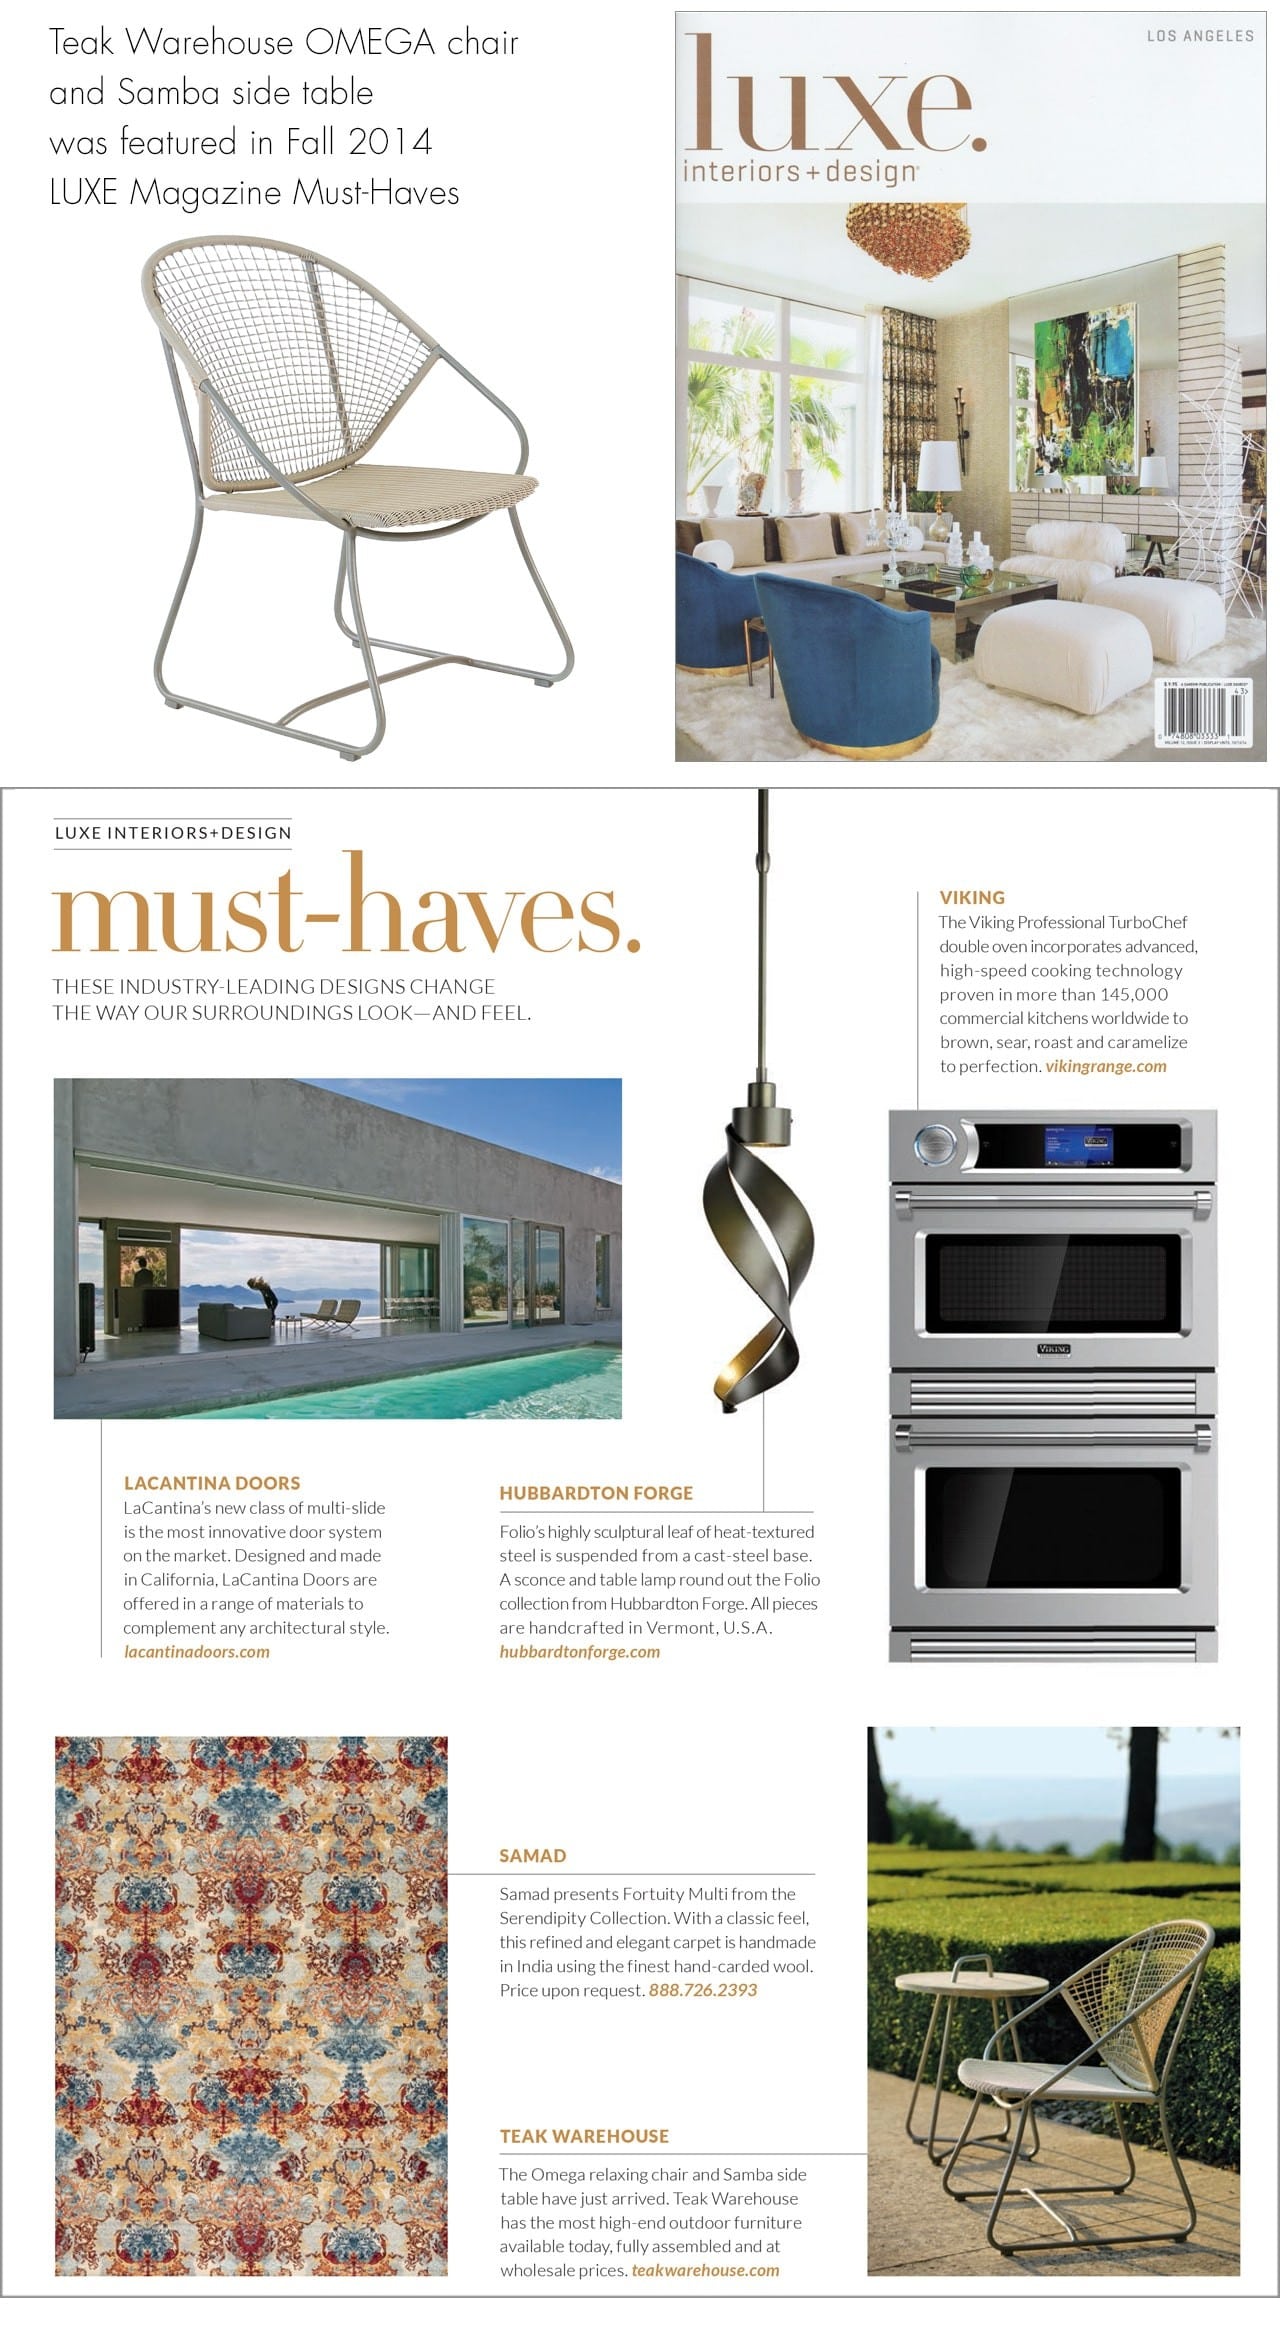 High End Outdoor Furniture from Teak Warehouse featured in Luxe Magazine's Fall Must Have article